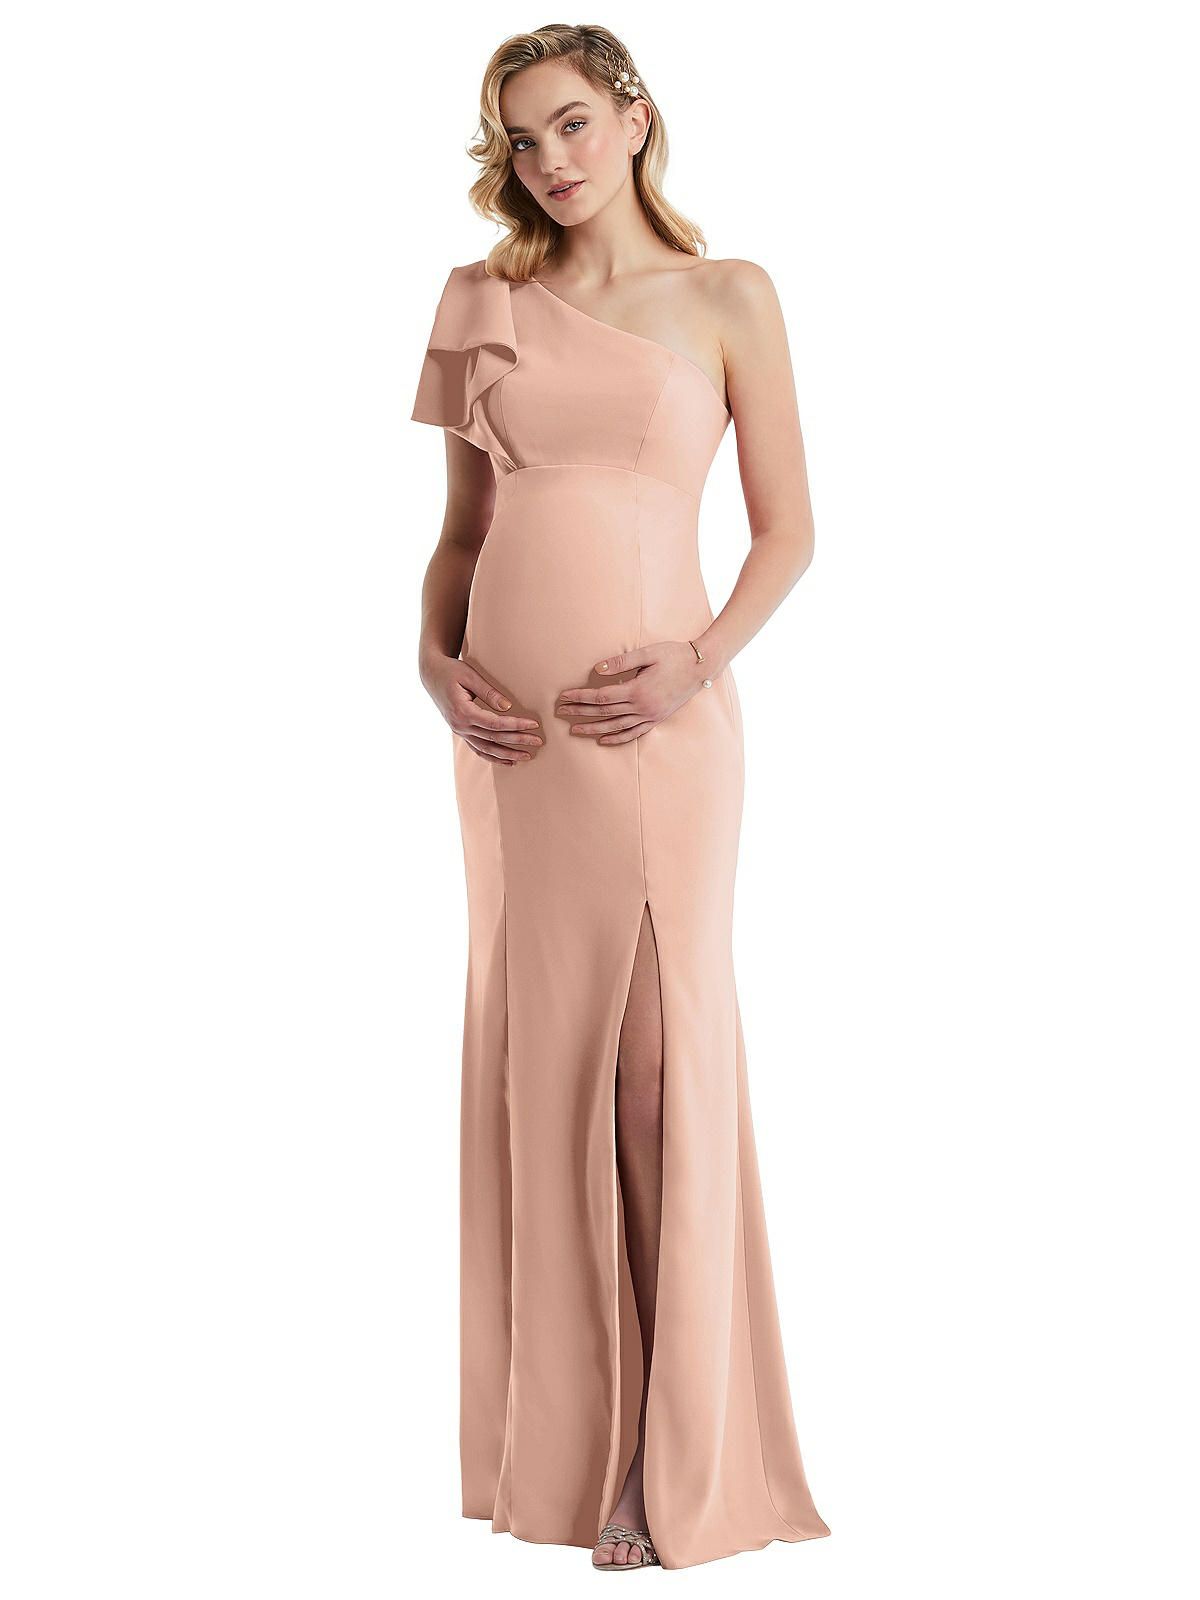 One-Shoulder Ruffle Sleeve Maternity Trumpet Gown in Pale Peach | The Dessy Group